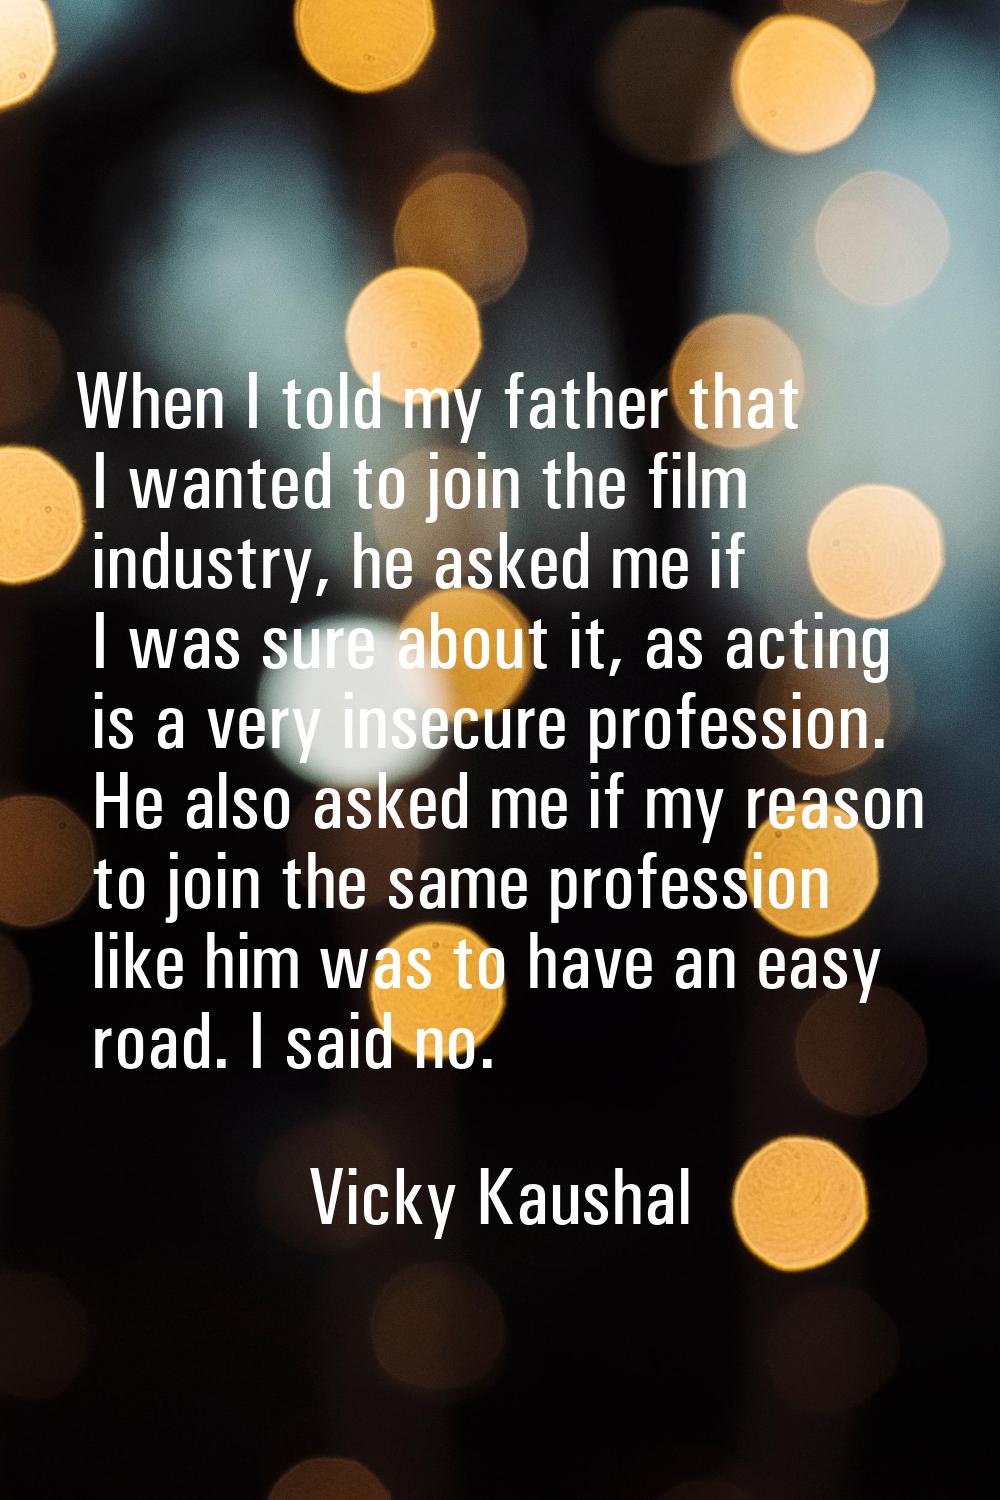 When I told my father that I wanted to join the film industry, he asked me if I was sure about it, 